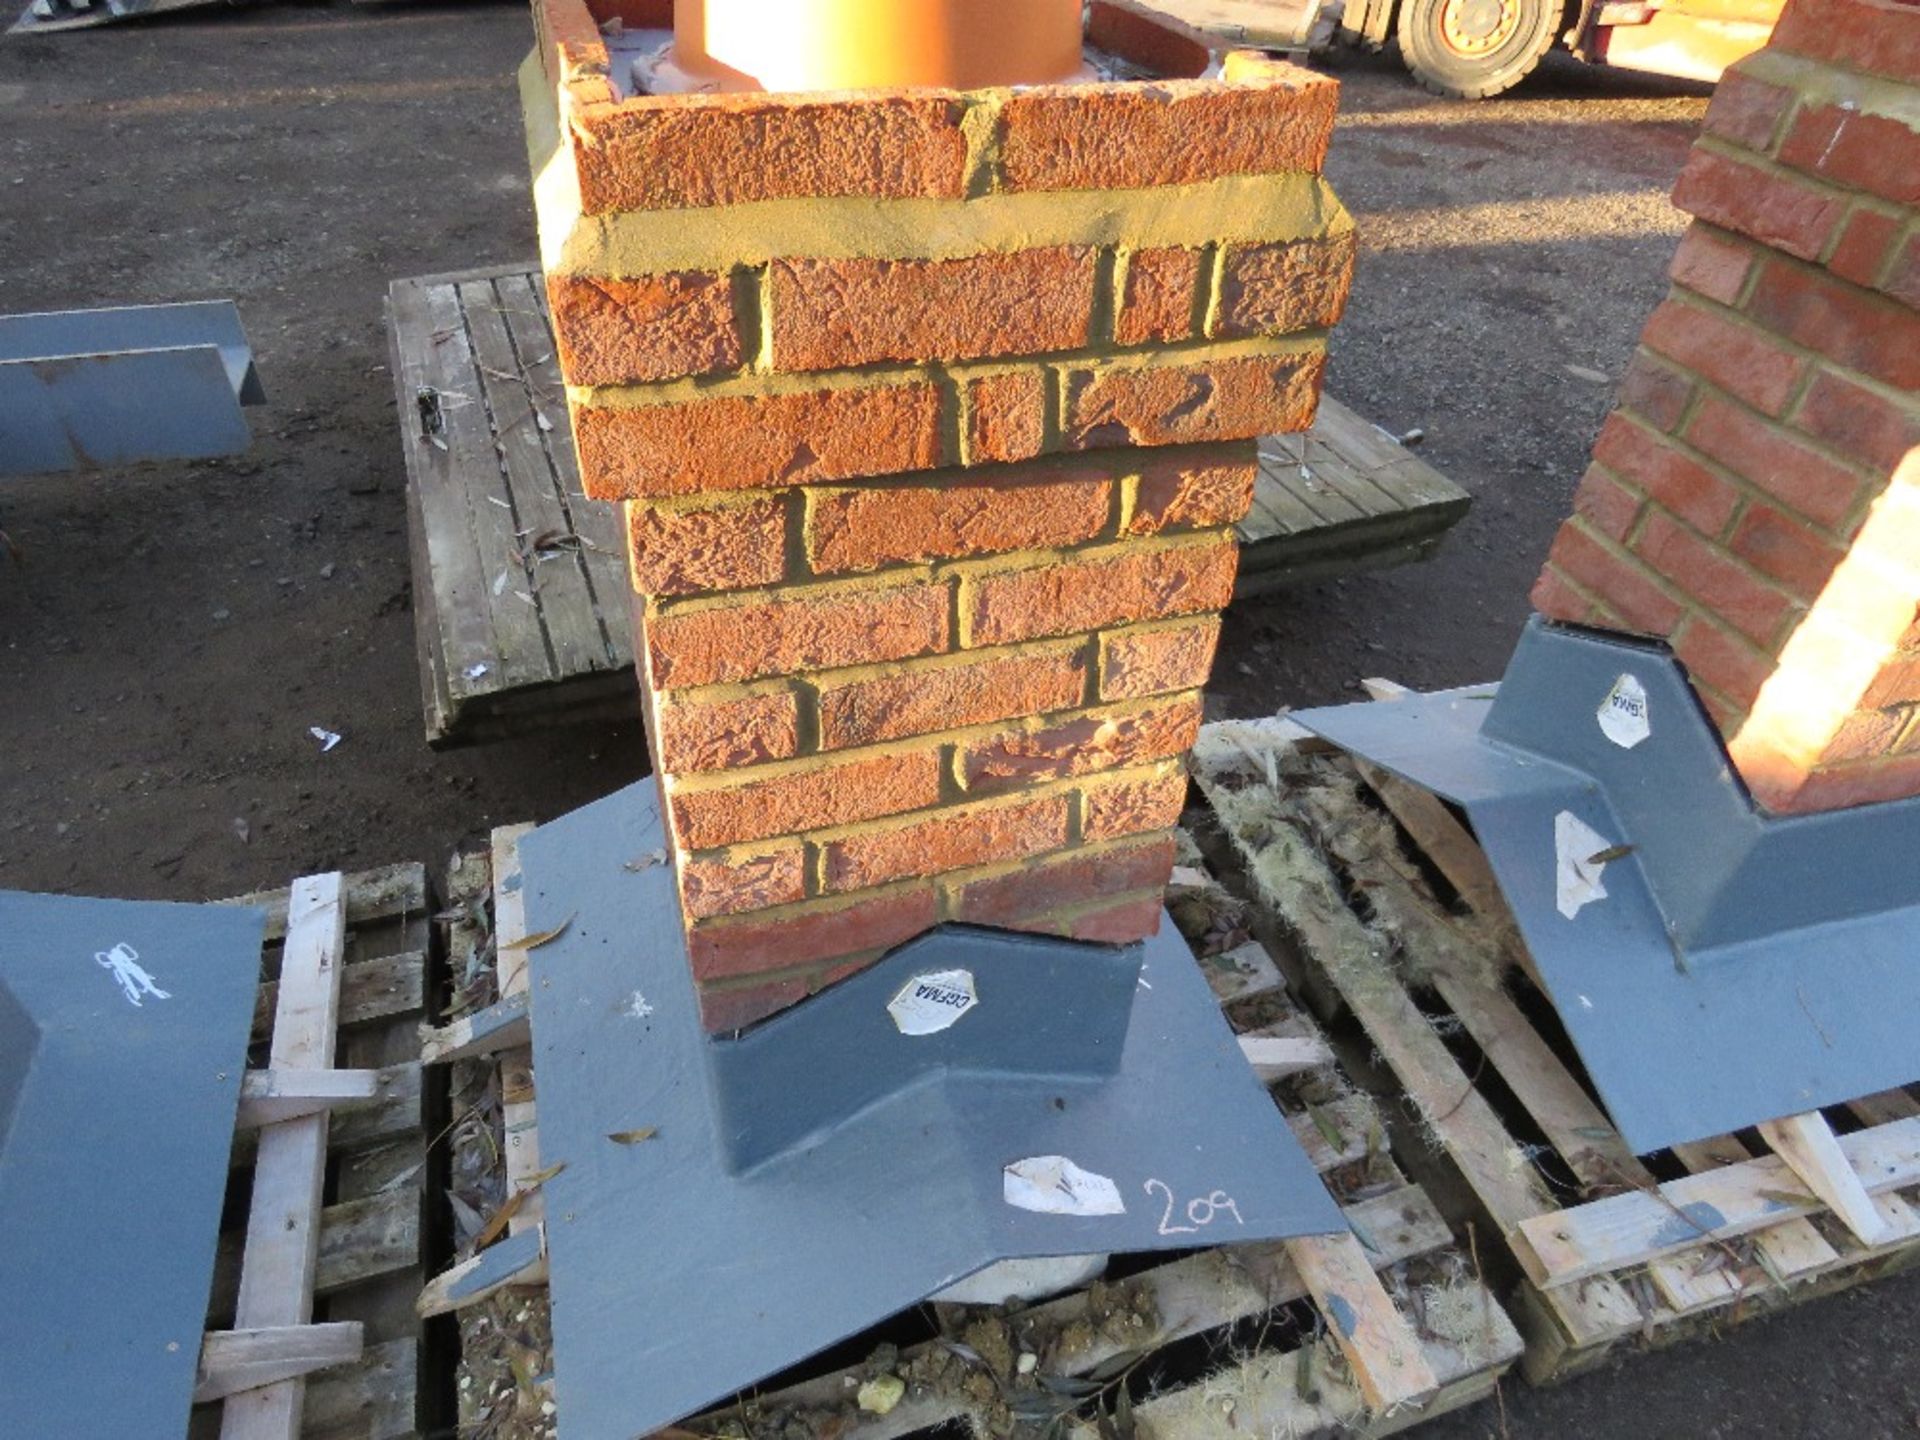 CGFMA FIBRE GLASS CHIMNEY STACK. GRP CENTRE AND BASE WITH REAL BRICK FACING. BELIEVED TO BE 25 DEGRE